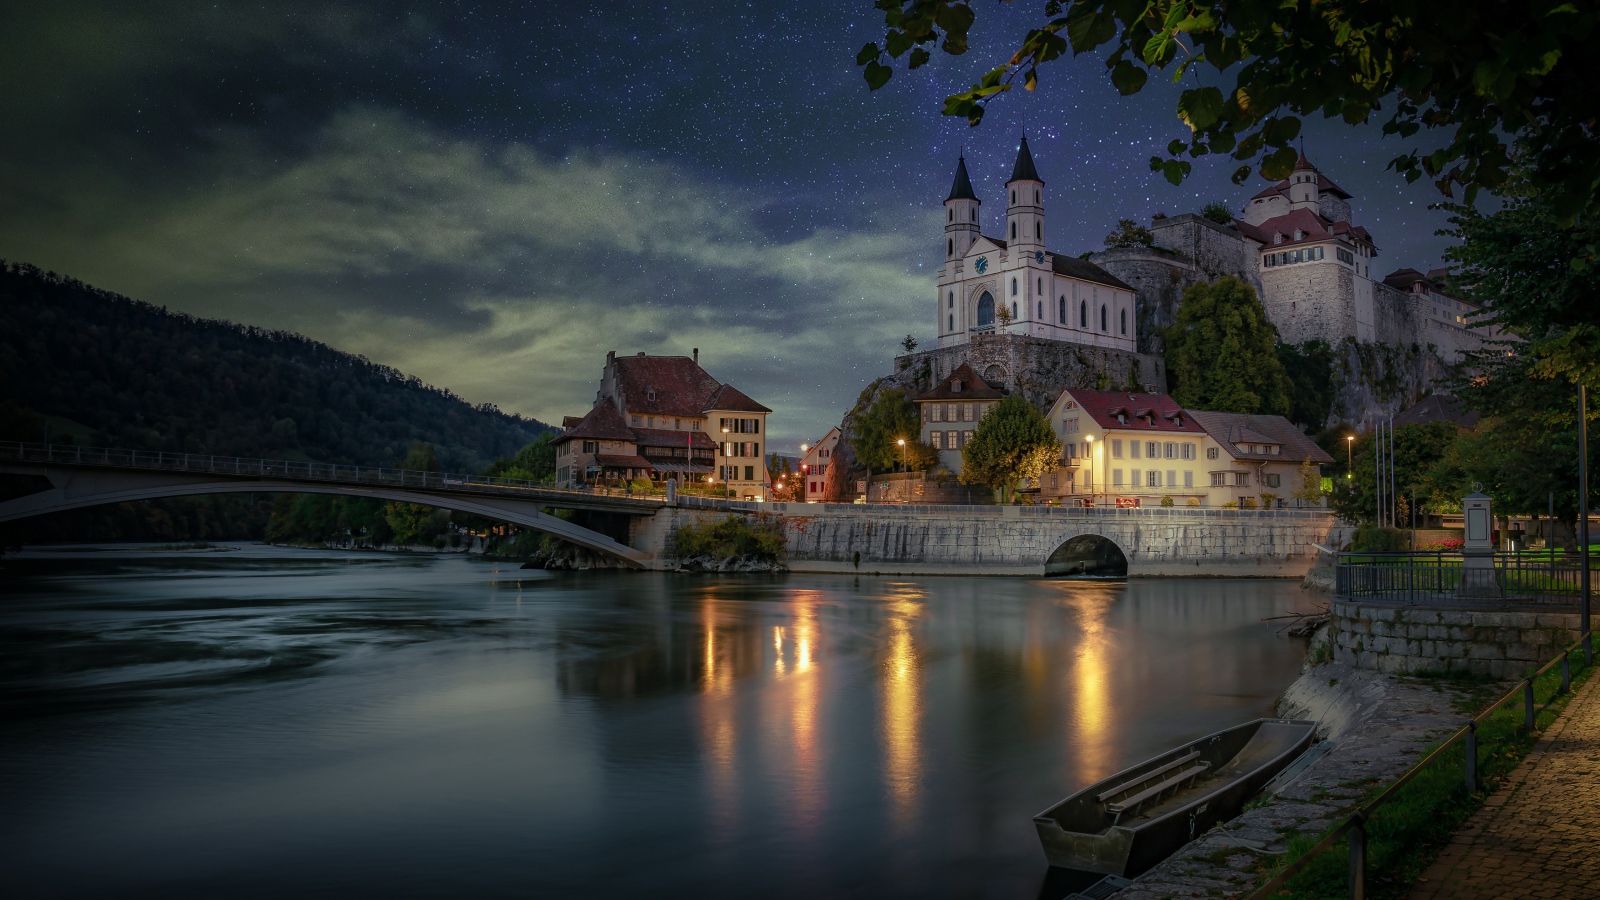 Beautiful view of the Aarburg castle at night under a beautiful starry sky, Switzerland